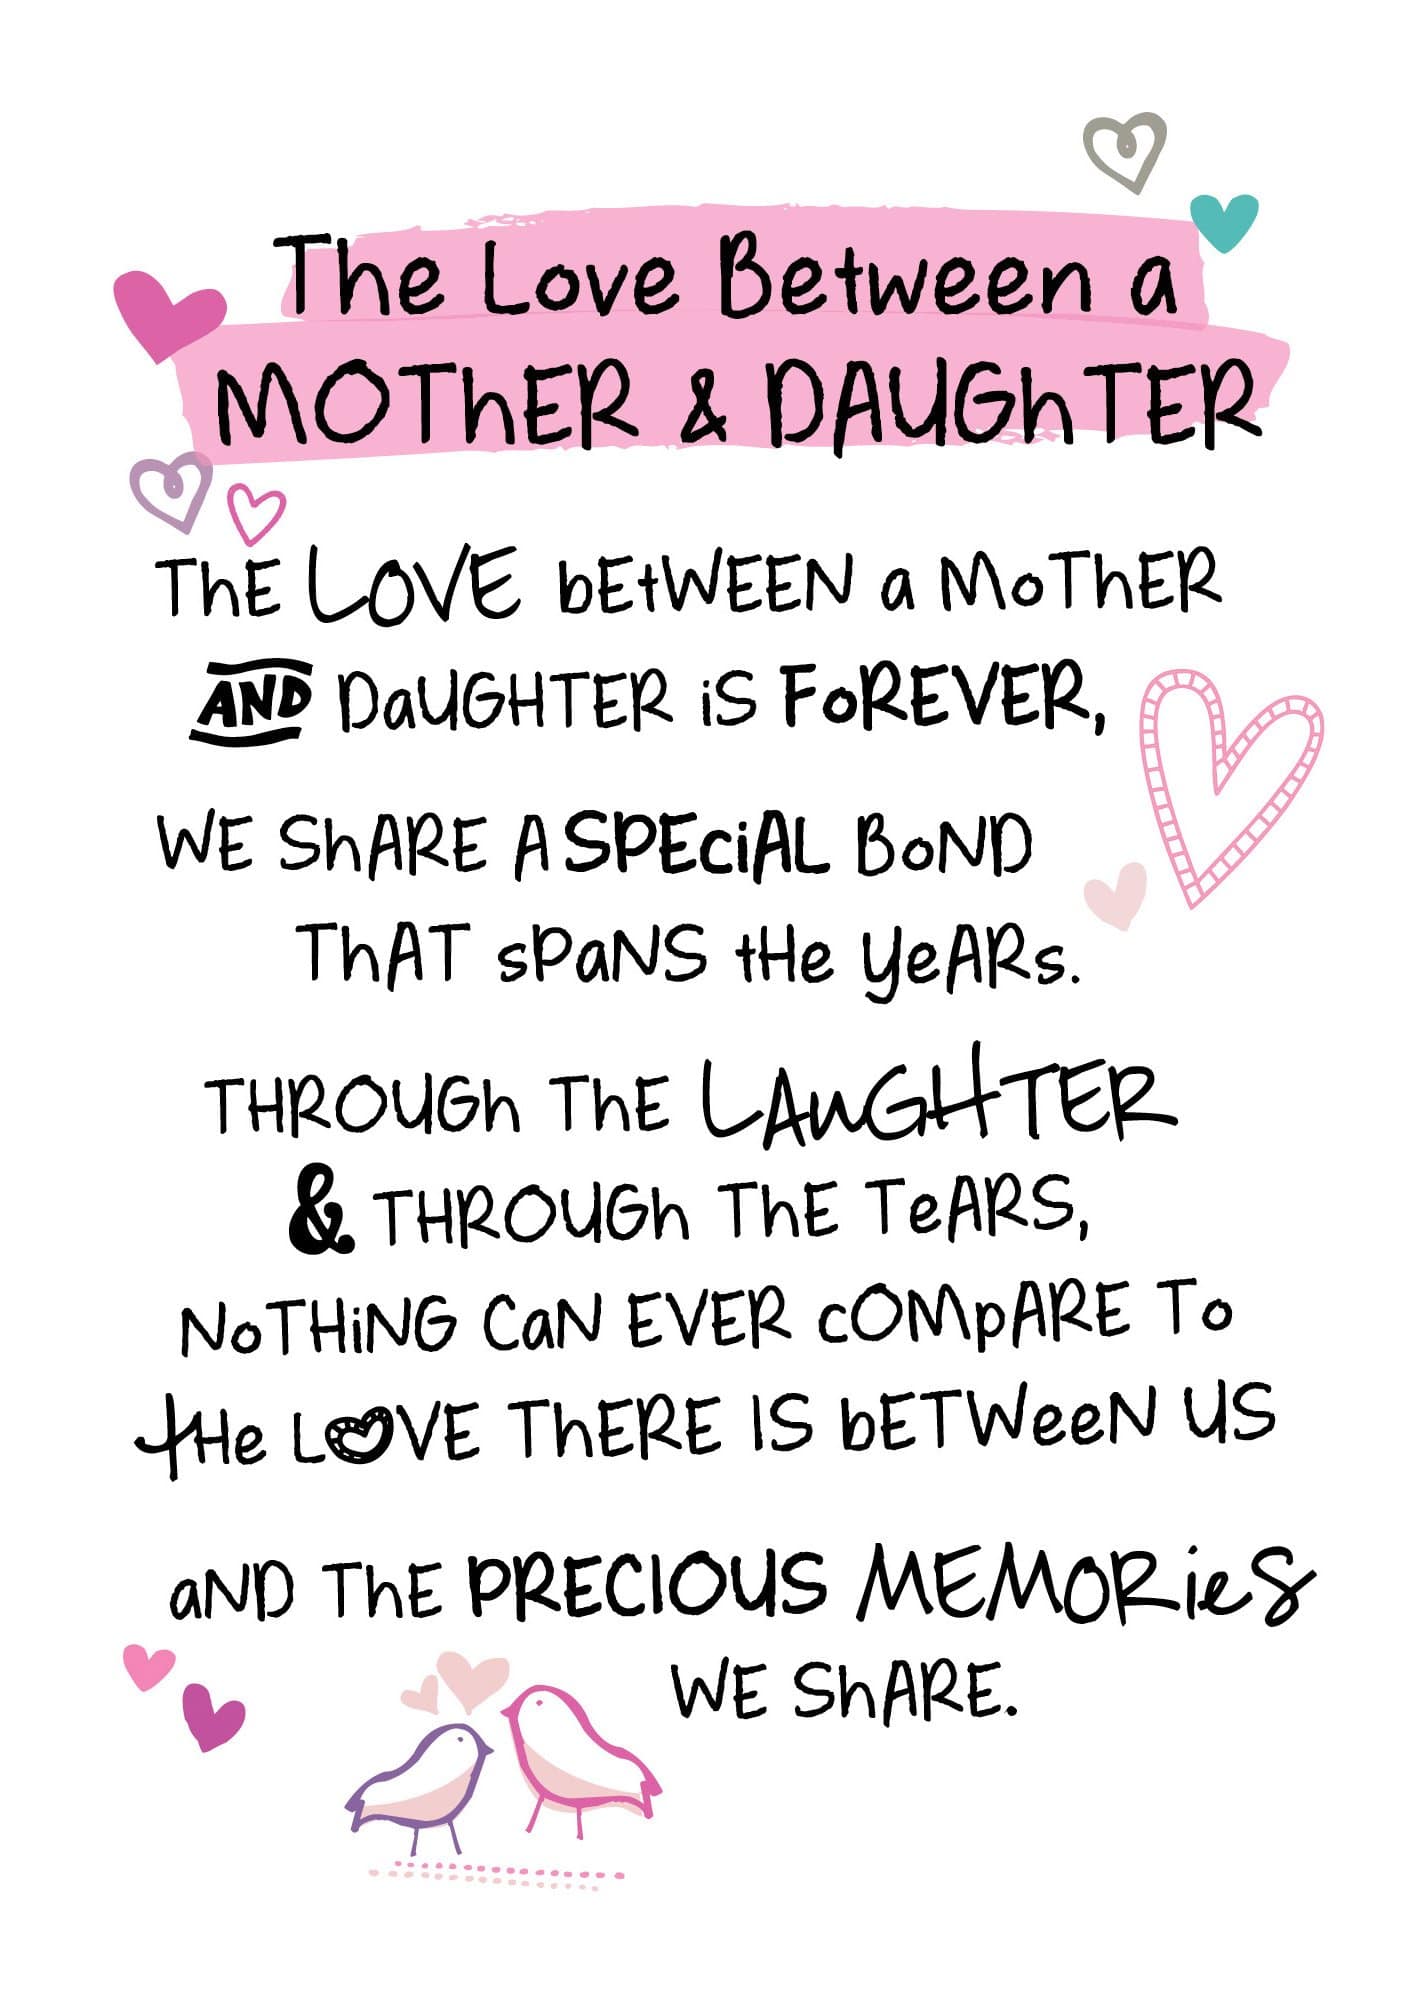 WPL Greeting Card Inspired Words Greetings Card - The Love Between A Mother & Daughter